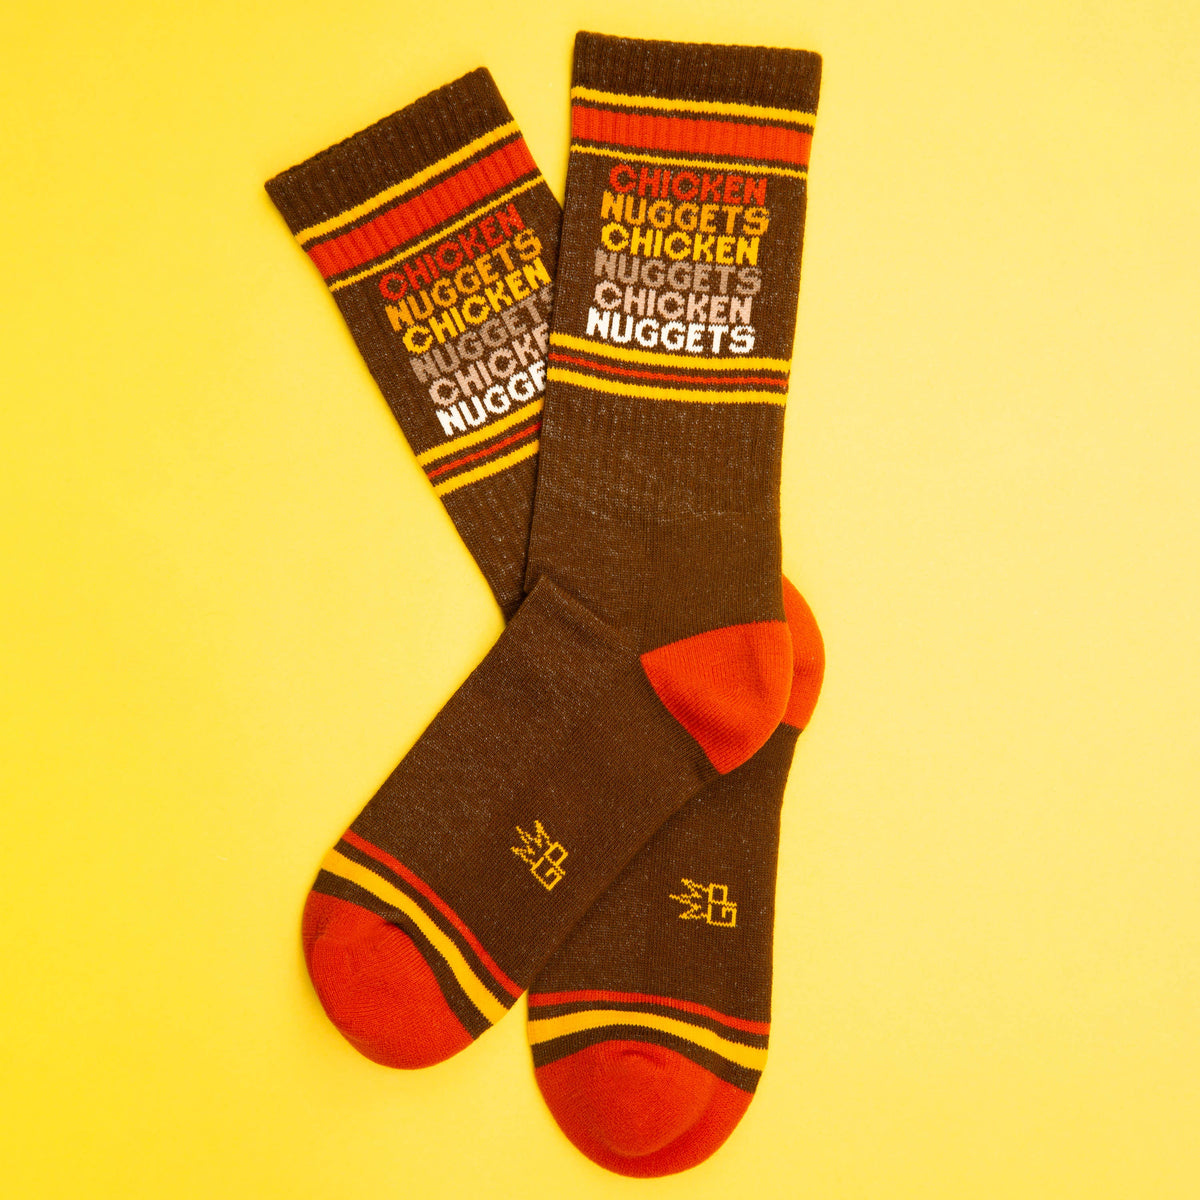 Gumball Poodle - Chicken Nuggets Gym Crew Socks